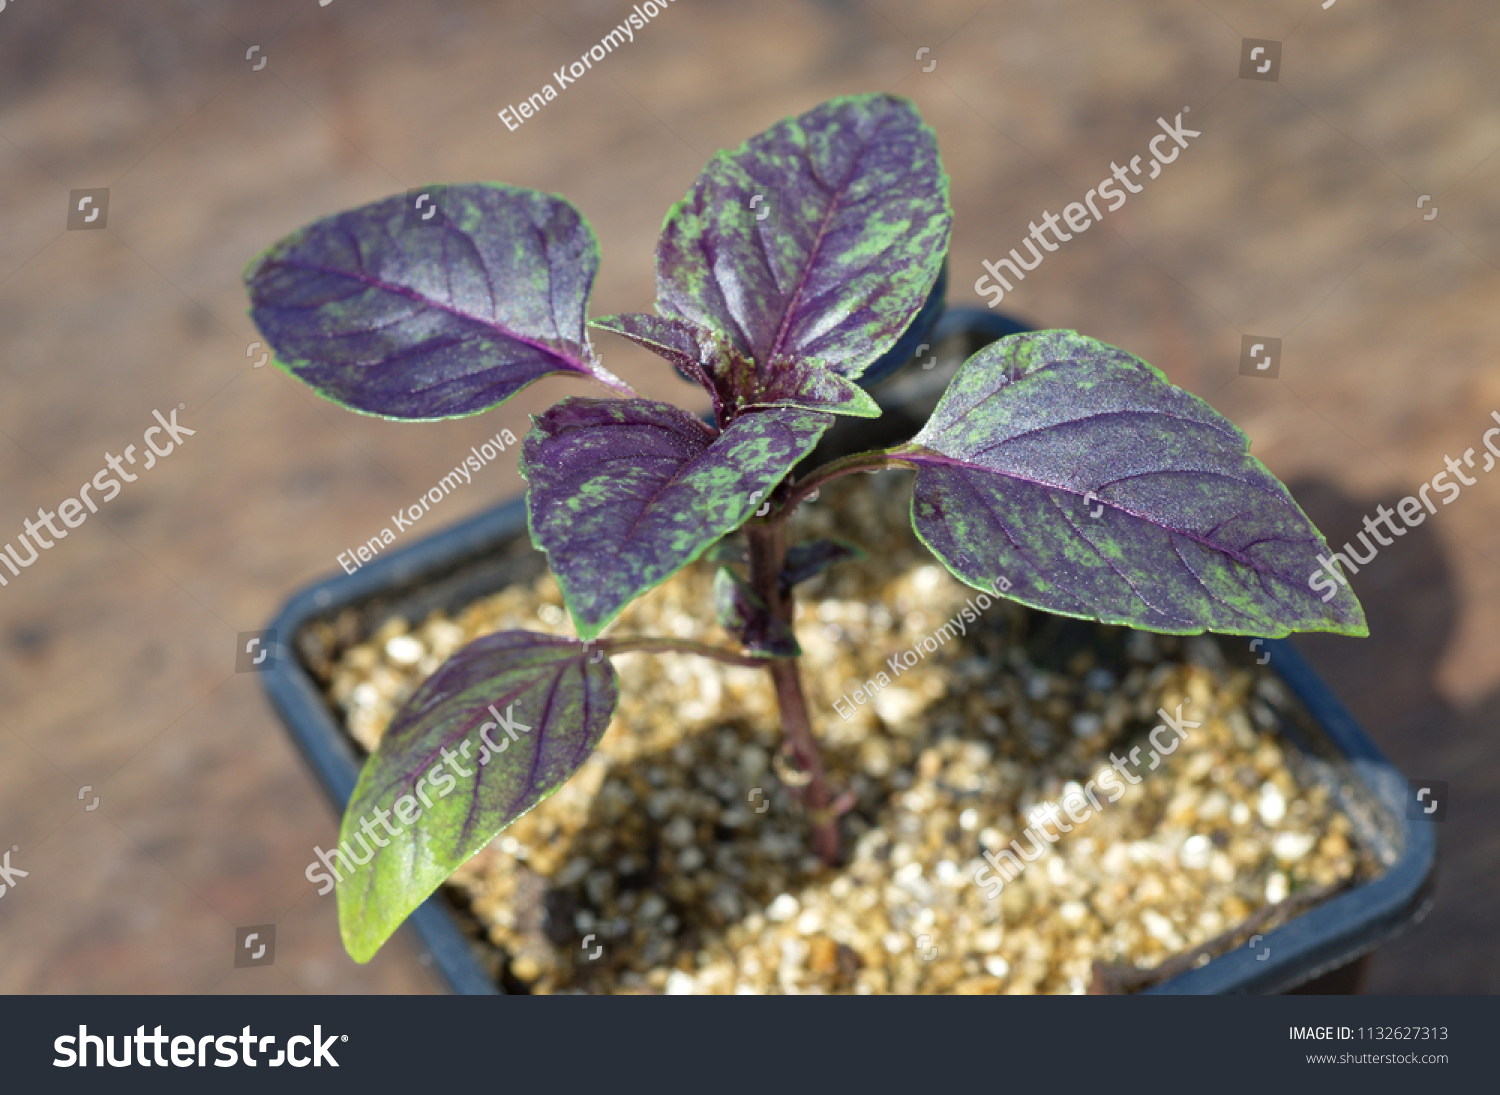 Download Young Purple Basil Plastic Pot Closeup Food And Drink Stock Image 1132627313 Yellowimages Mockups